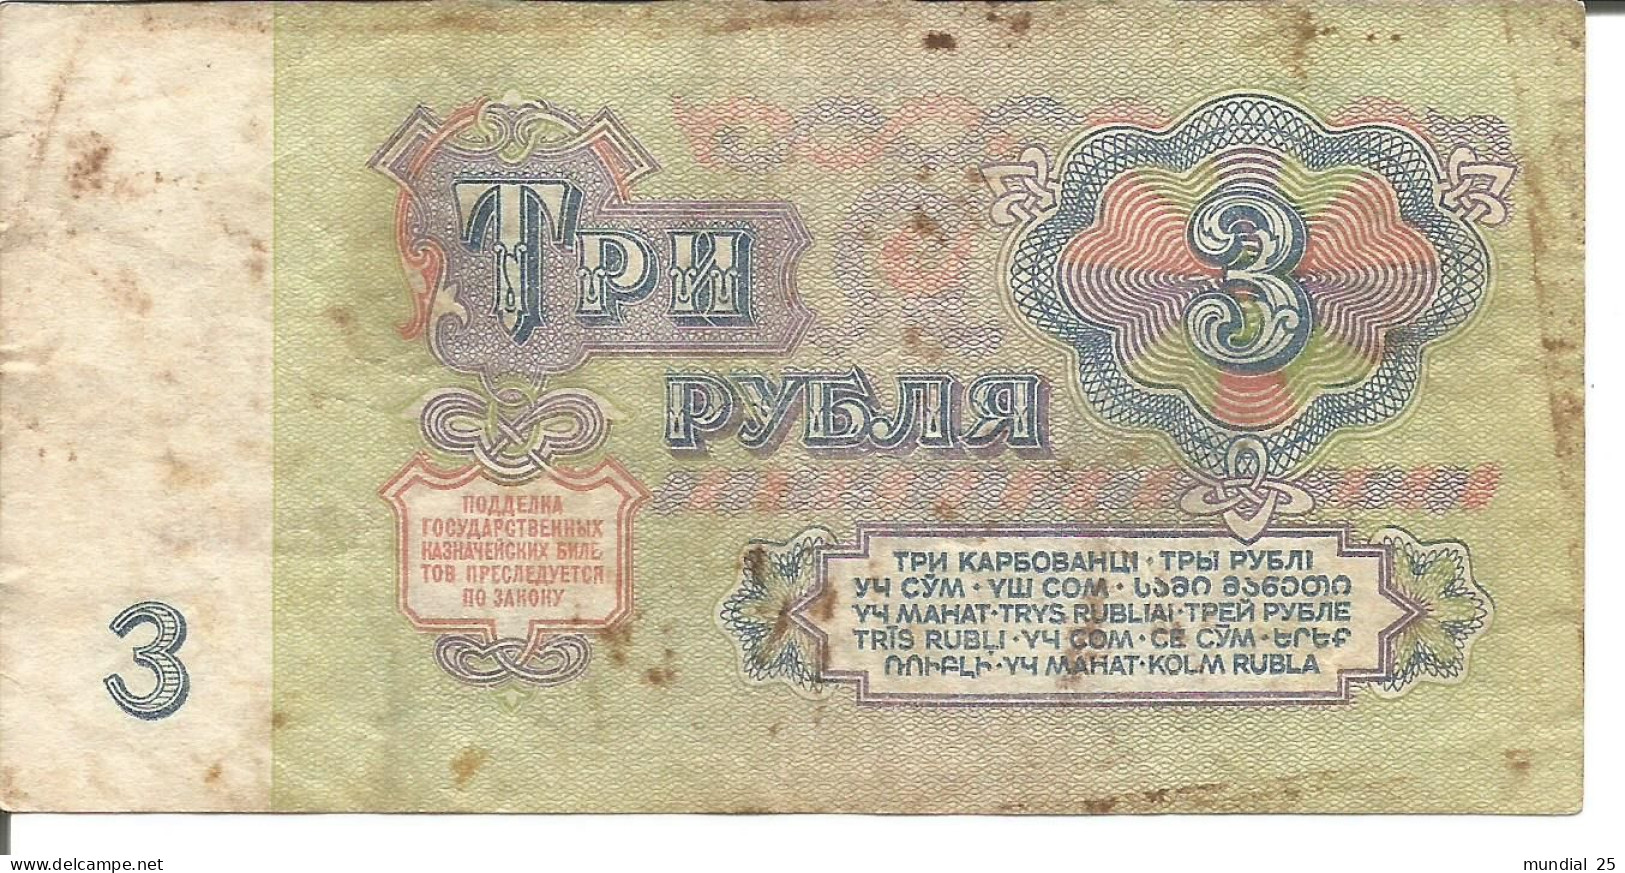 3 RUSSIA NOTES 3 RUBLES 1961 - Russia